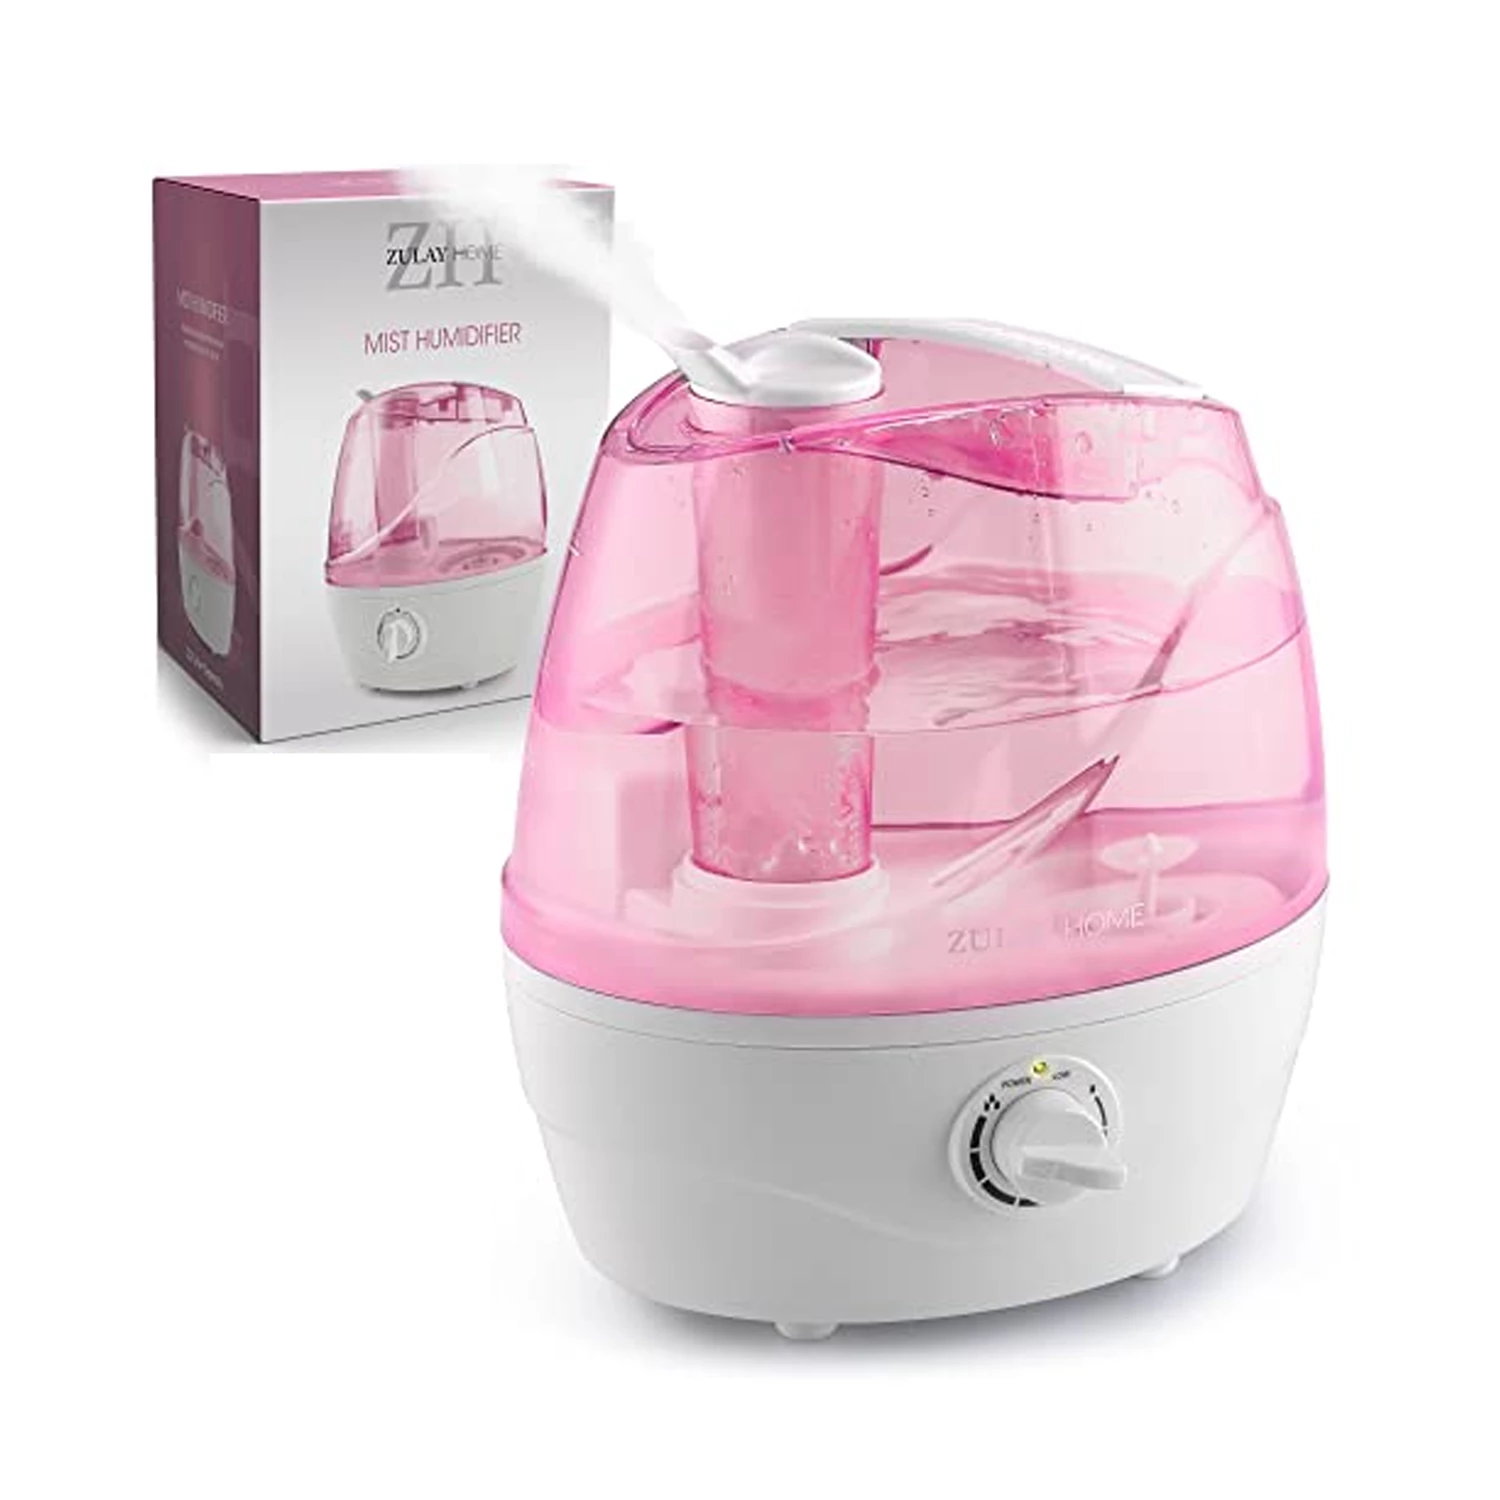 Zulay Cool Mist Humidifiers (2.2L Water Tank)